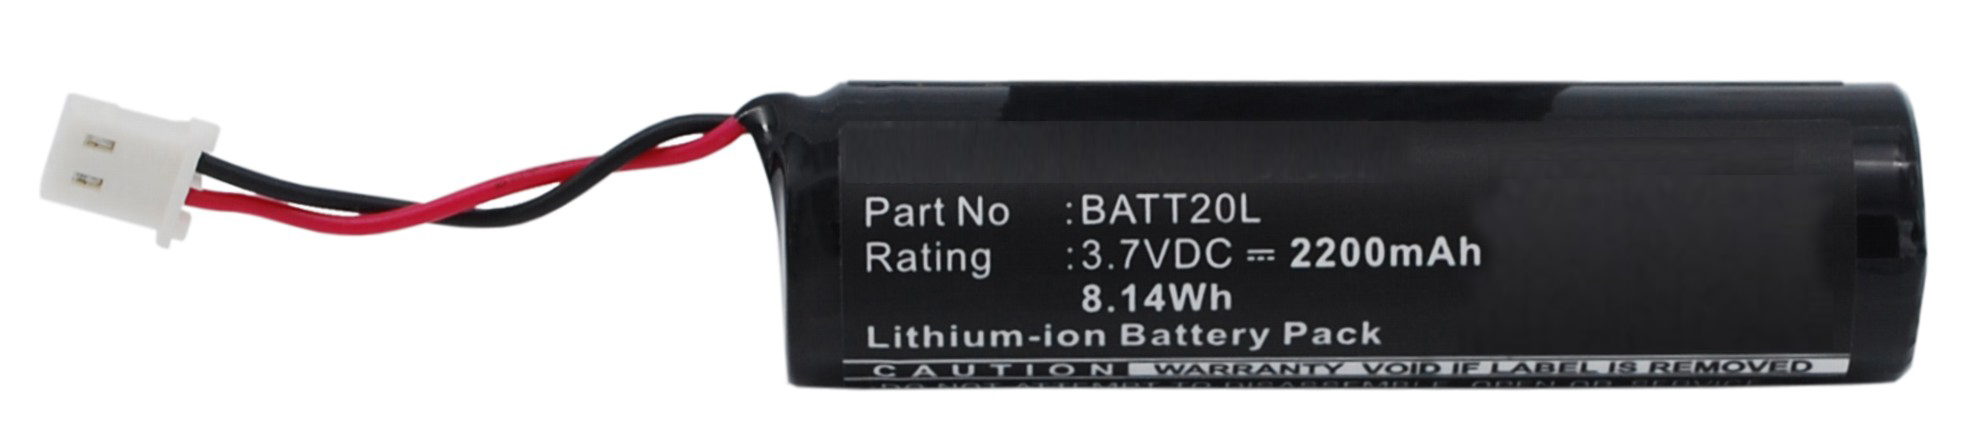 Synergy Digital Battery Compatible With MIDLAND BATT20L Replacement Battery - (Li-Ion, 3.7V, 2200 mAh)